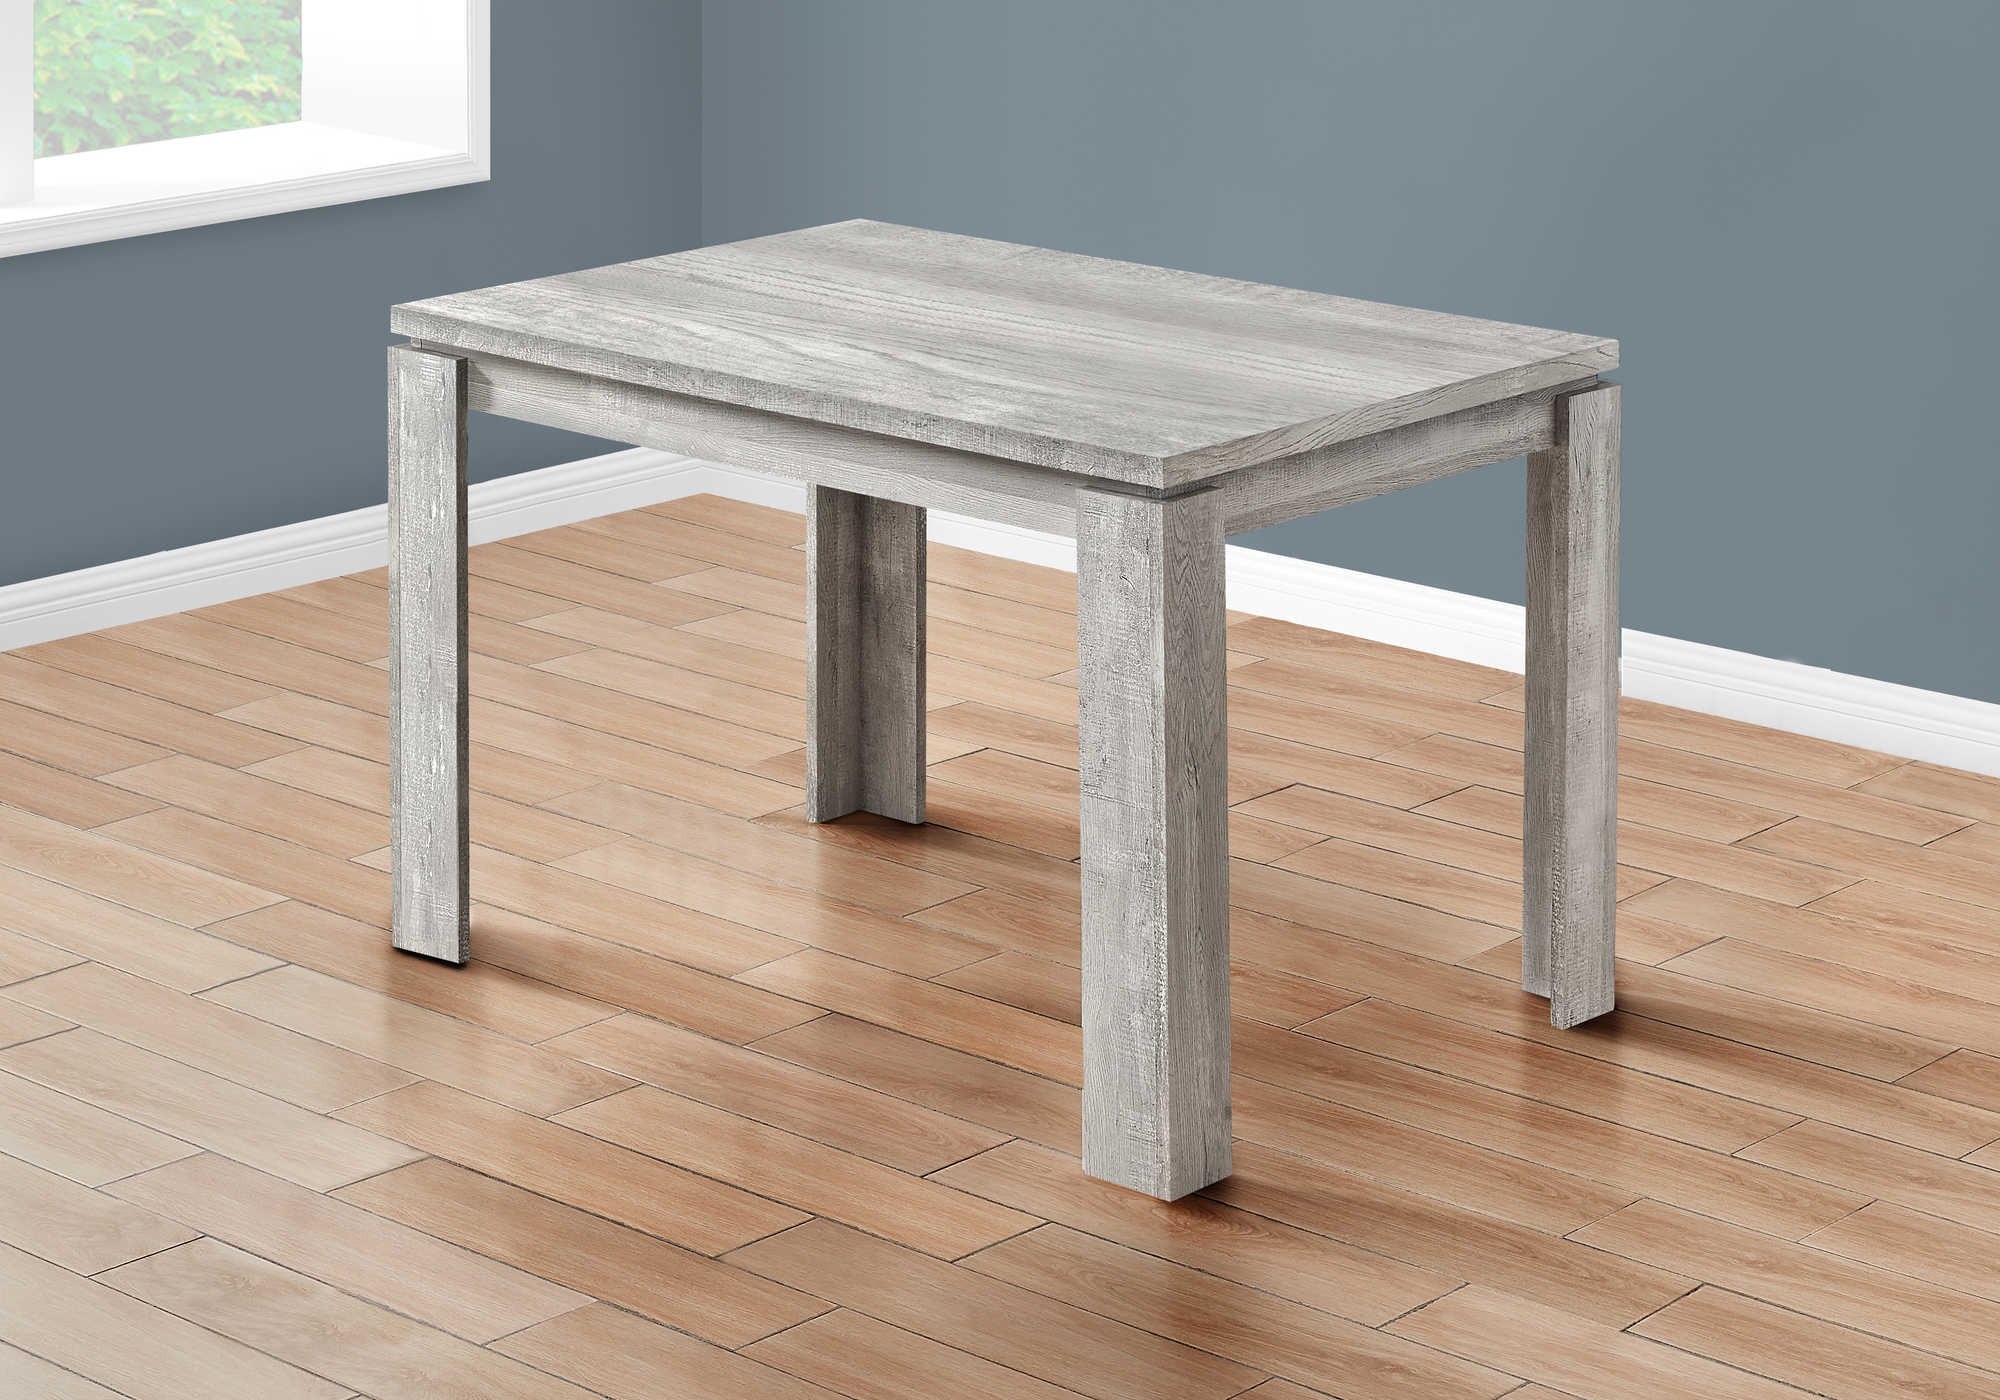 DINING TABLE - 32"X 48" / GREY RECLAIMED WOOD-LOOK